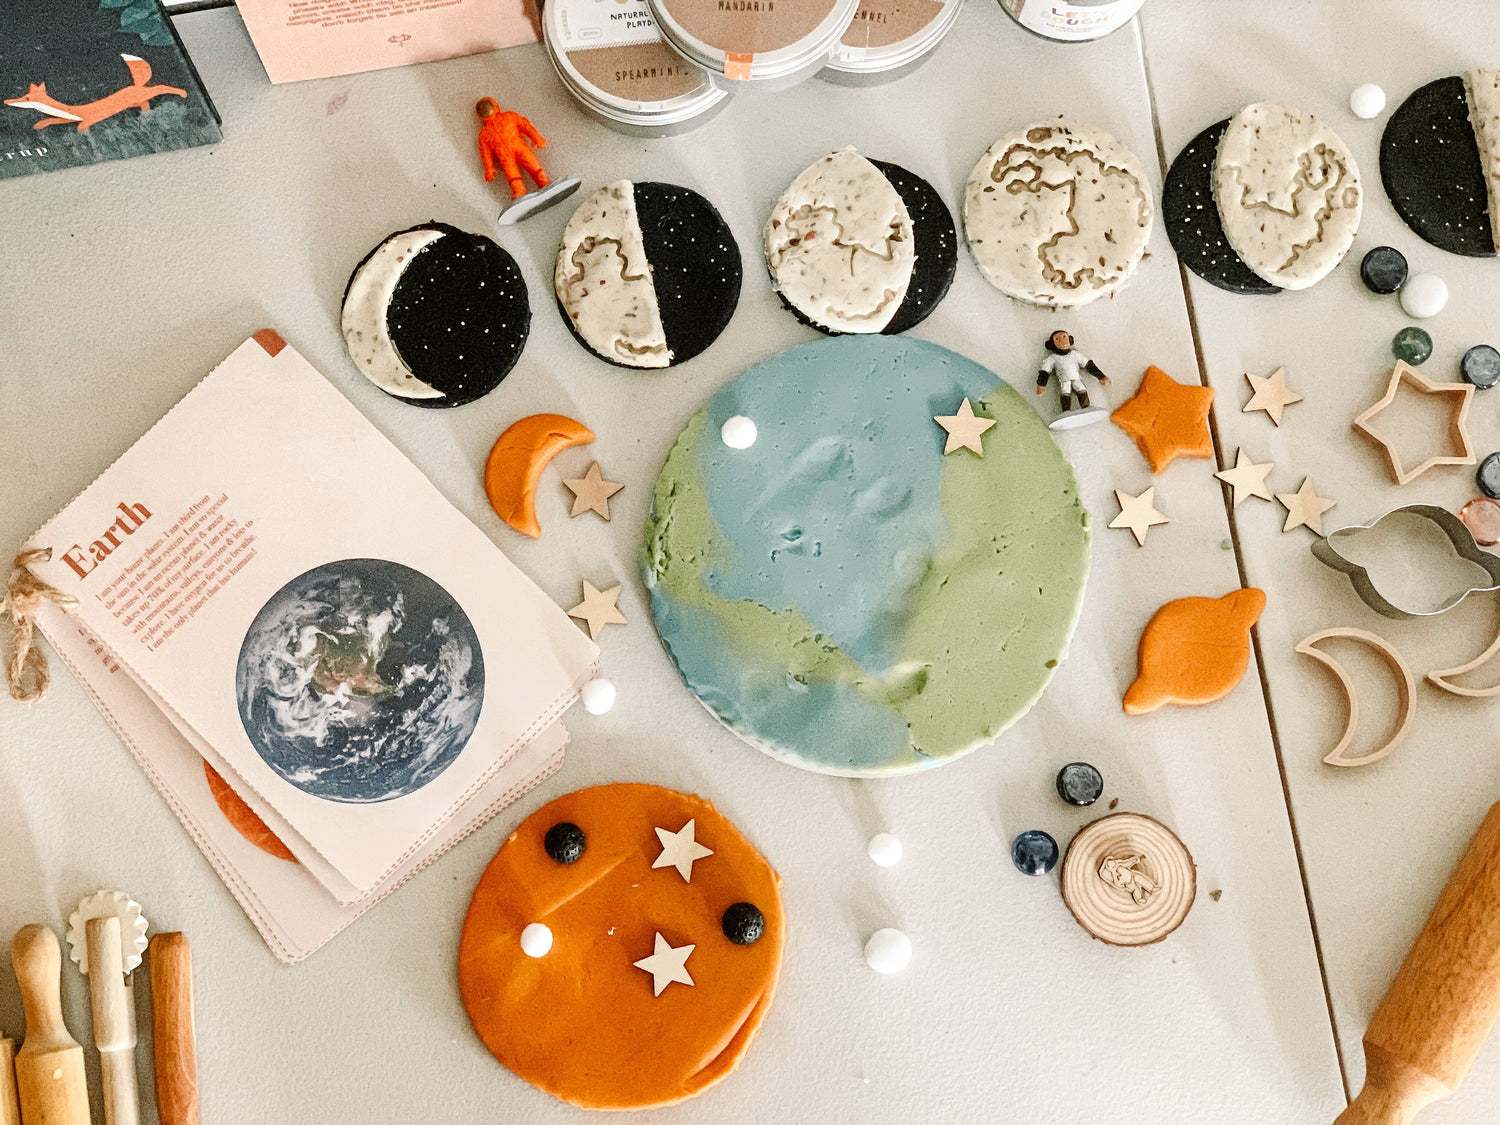 LARGE MOON PHASES ECO CUTTER SET PRE-ORDER by KINFOLK PANTRY - The Playful Collective